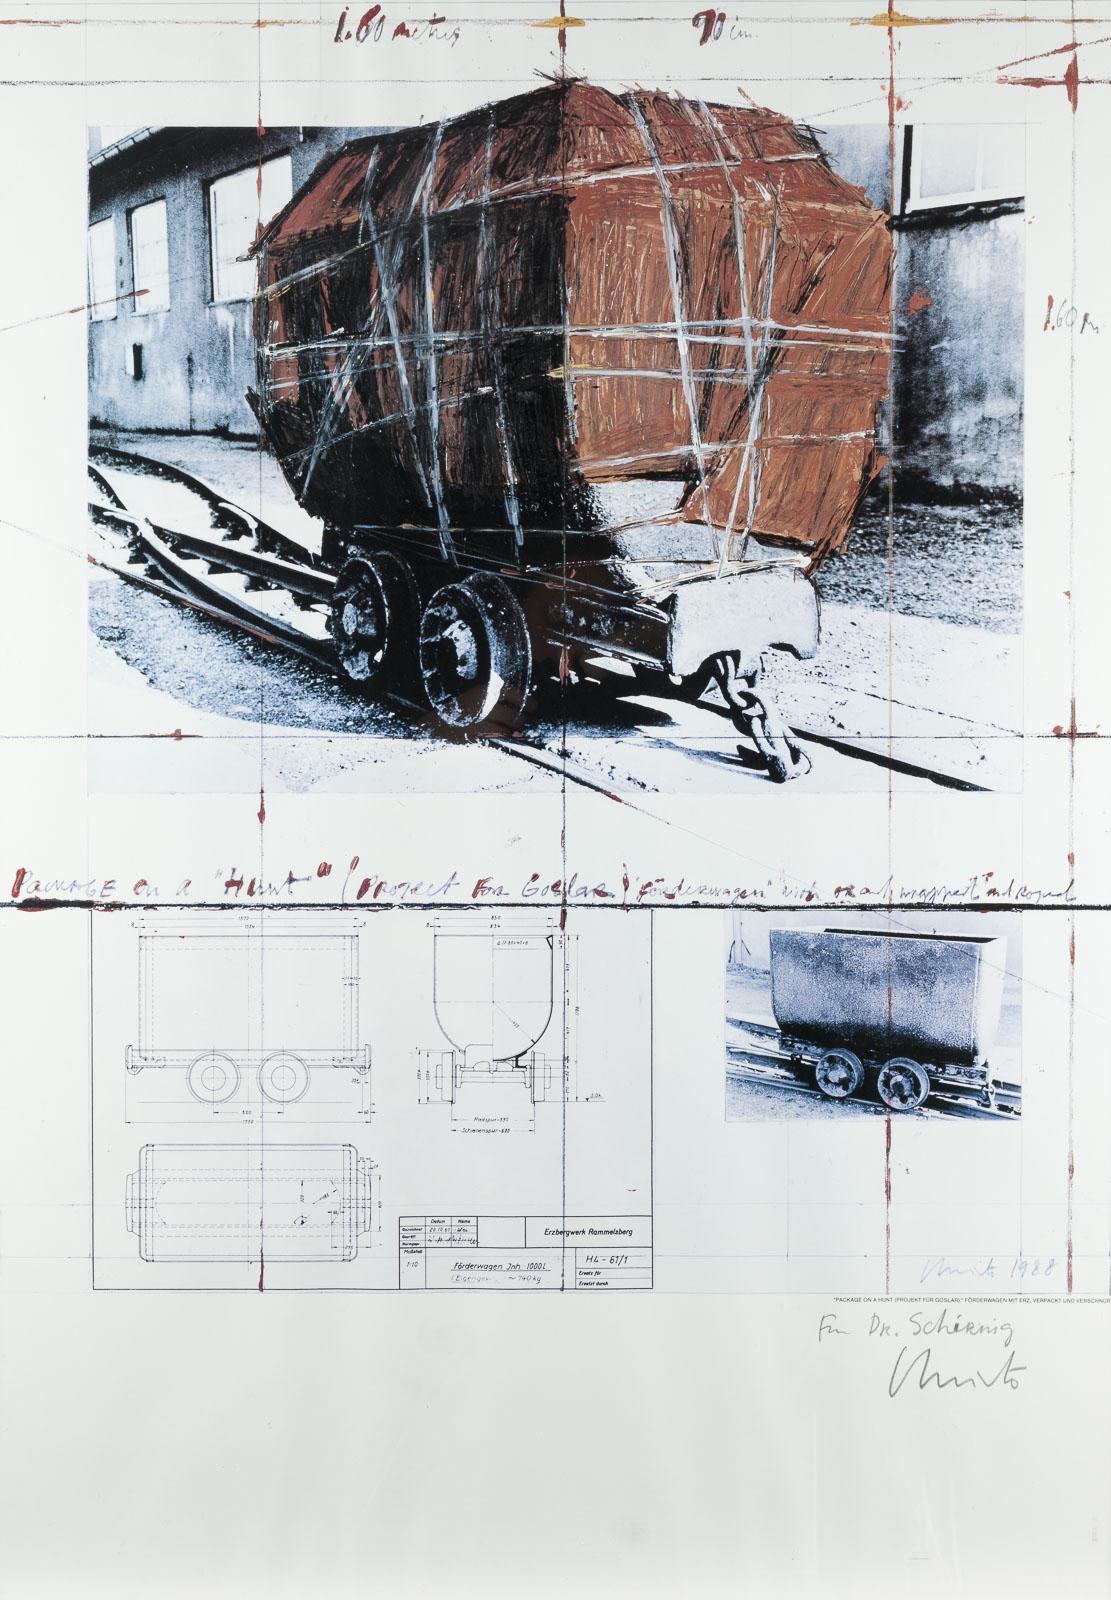 'PACKAGE ON A 'HUNT' - PROJECT FOR GOSLAR' (1988)